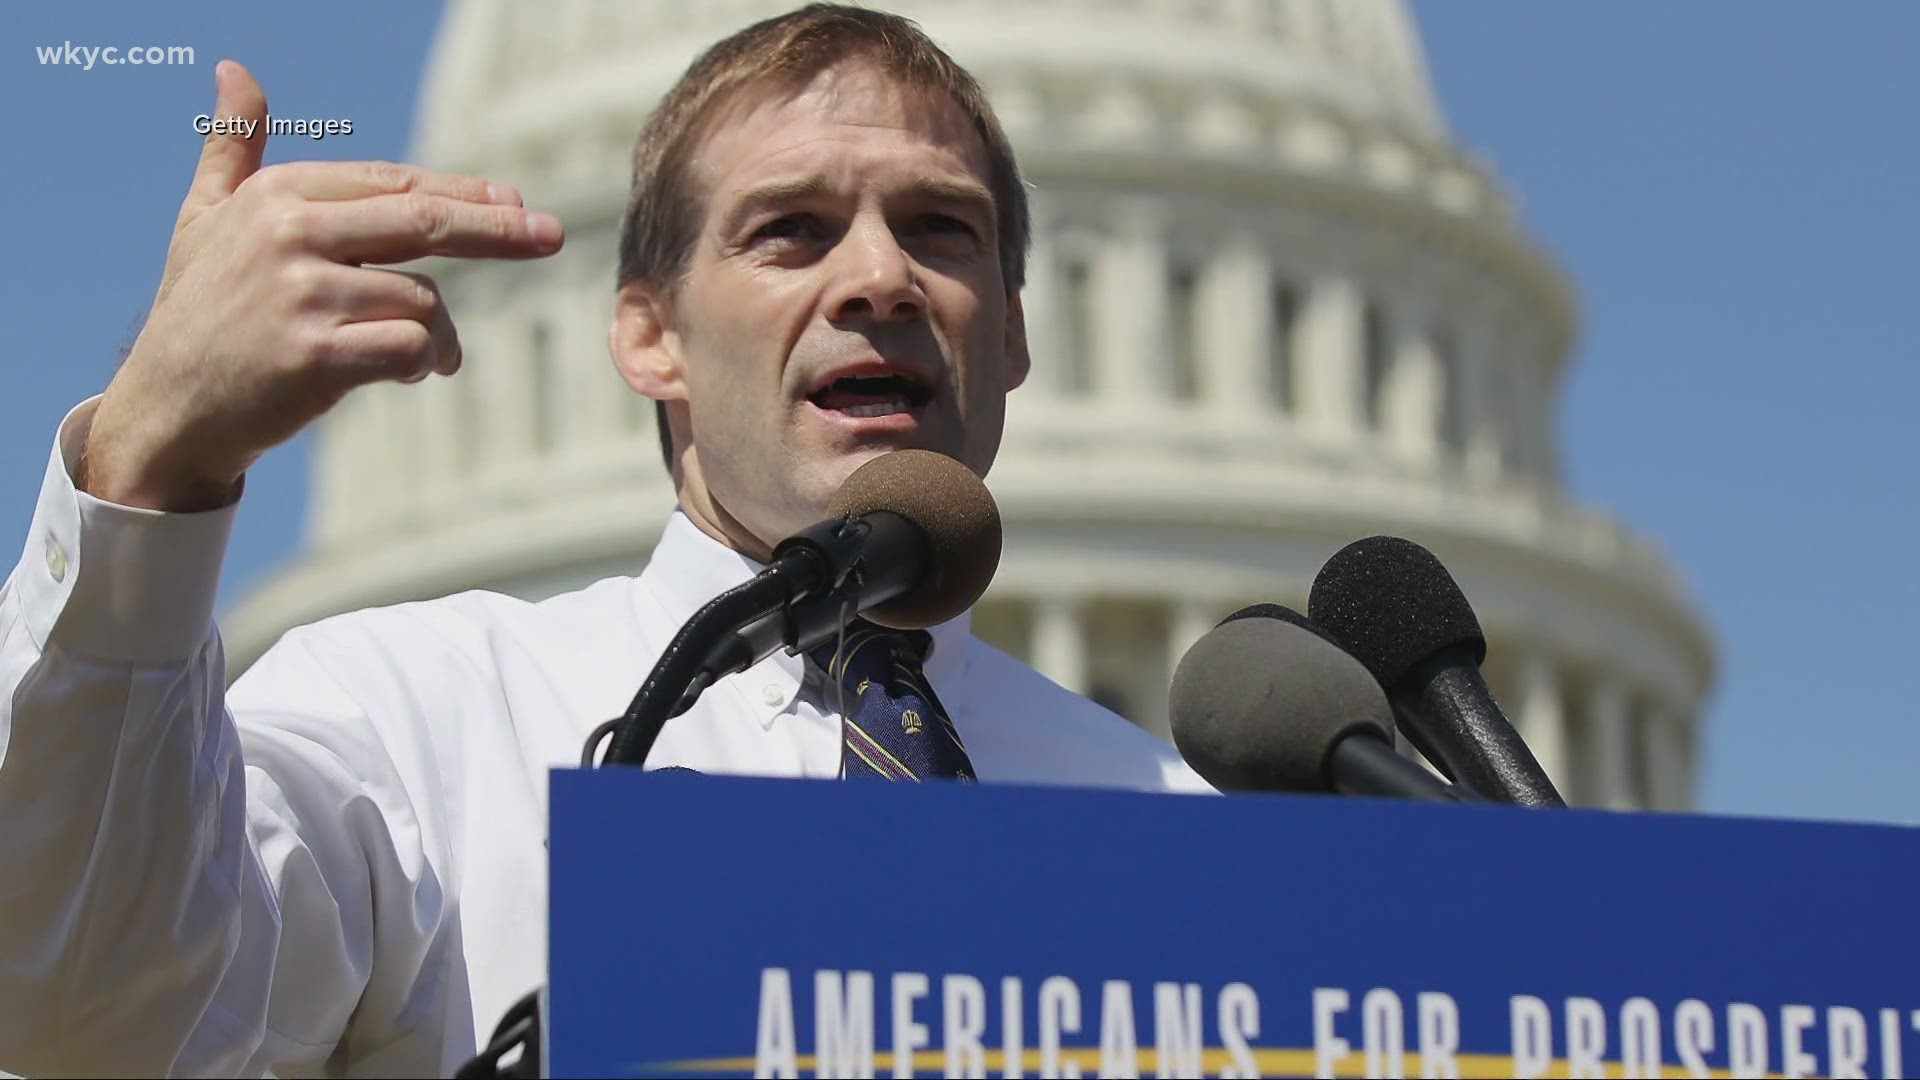 Ohio Rep. Jim Jordan will not join the race to replace Rob Portman in the US Senate next year.  Jordan will run for reelection in the House of Representatives.